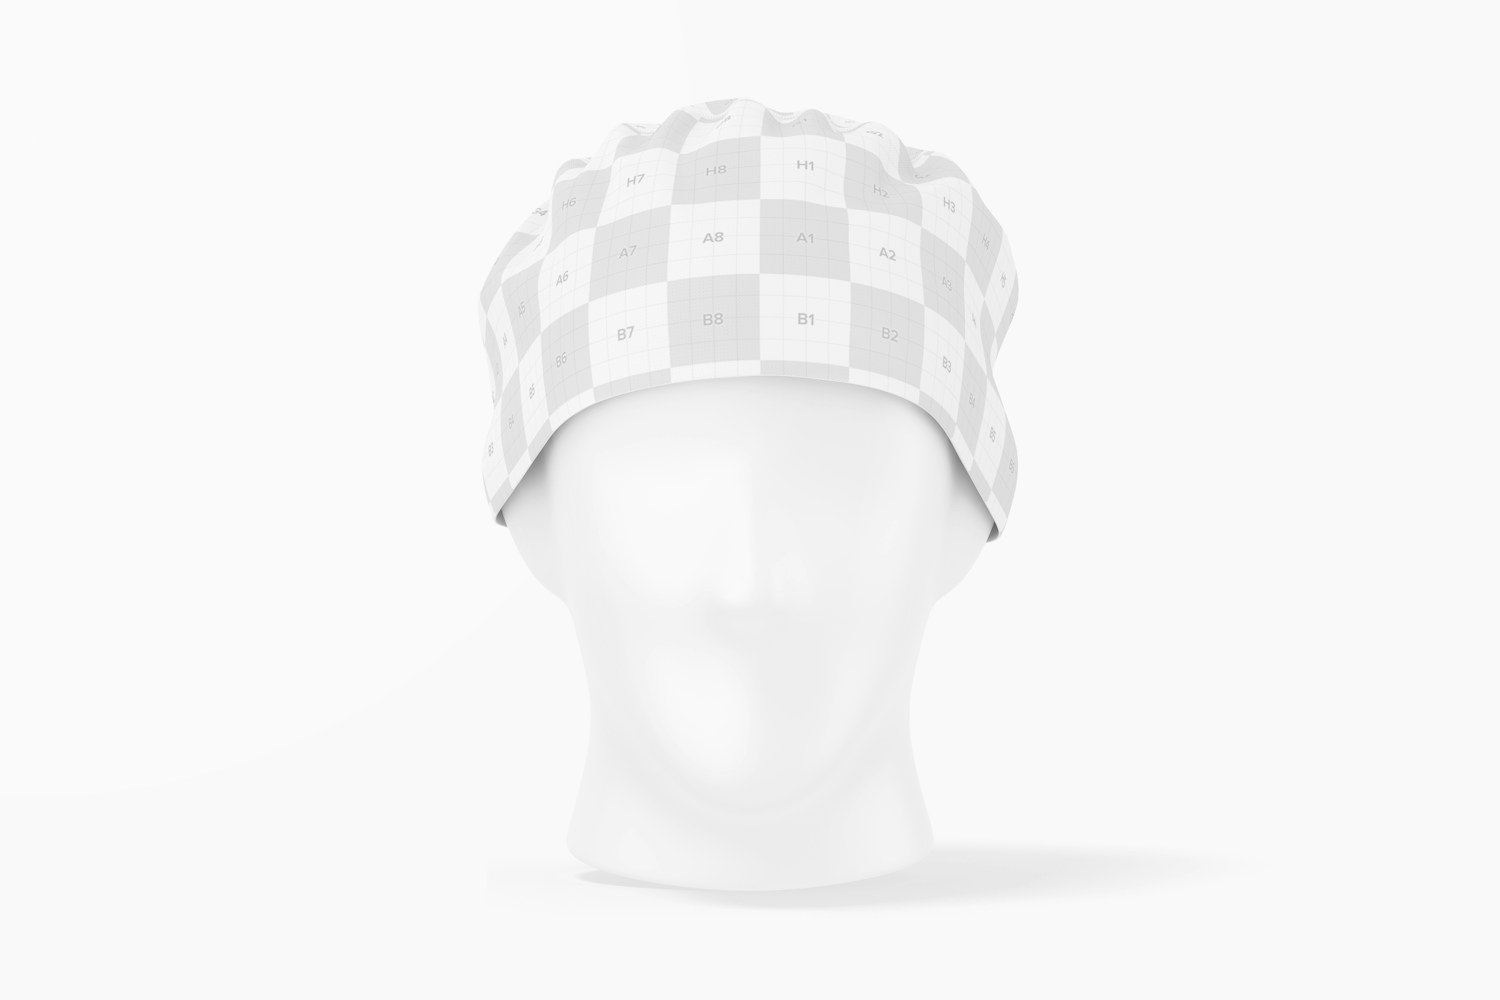 Fabric Surgical Cap Mockup, Front View